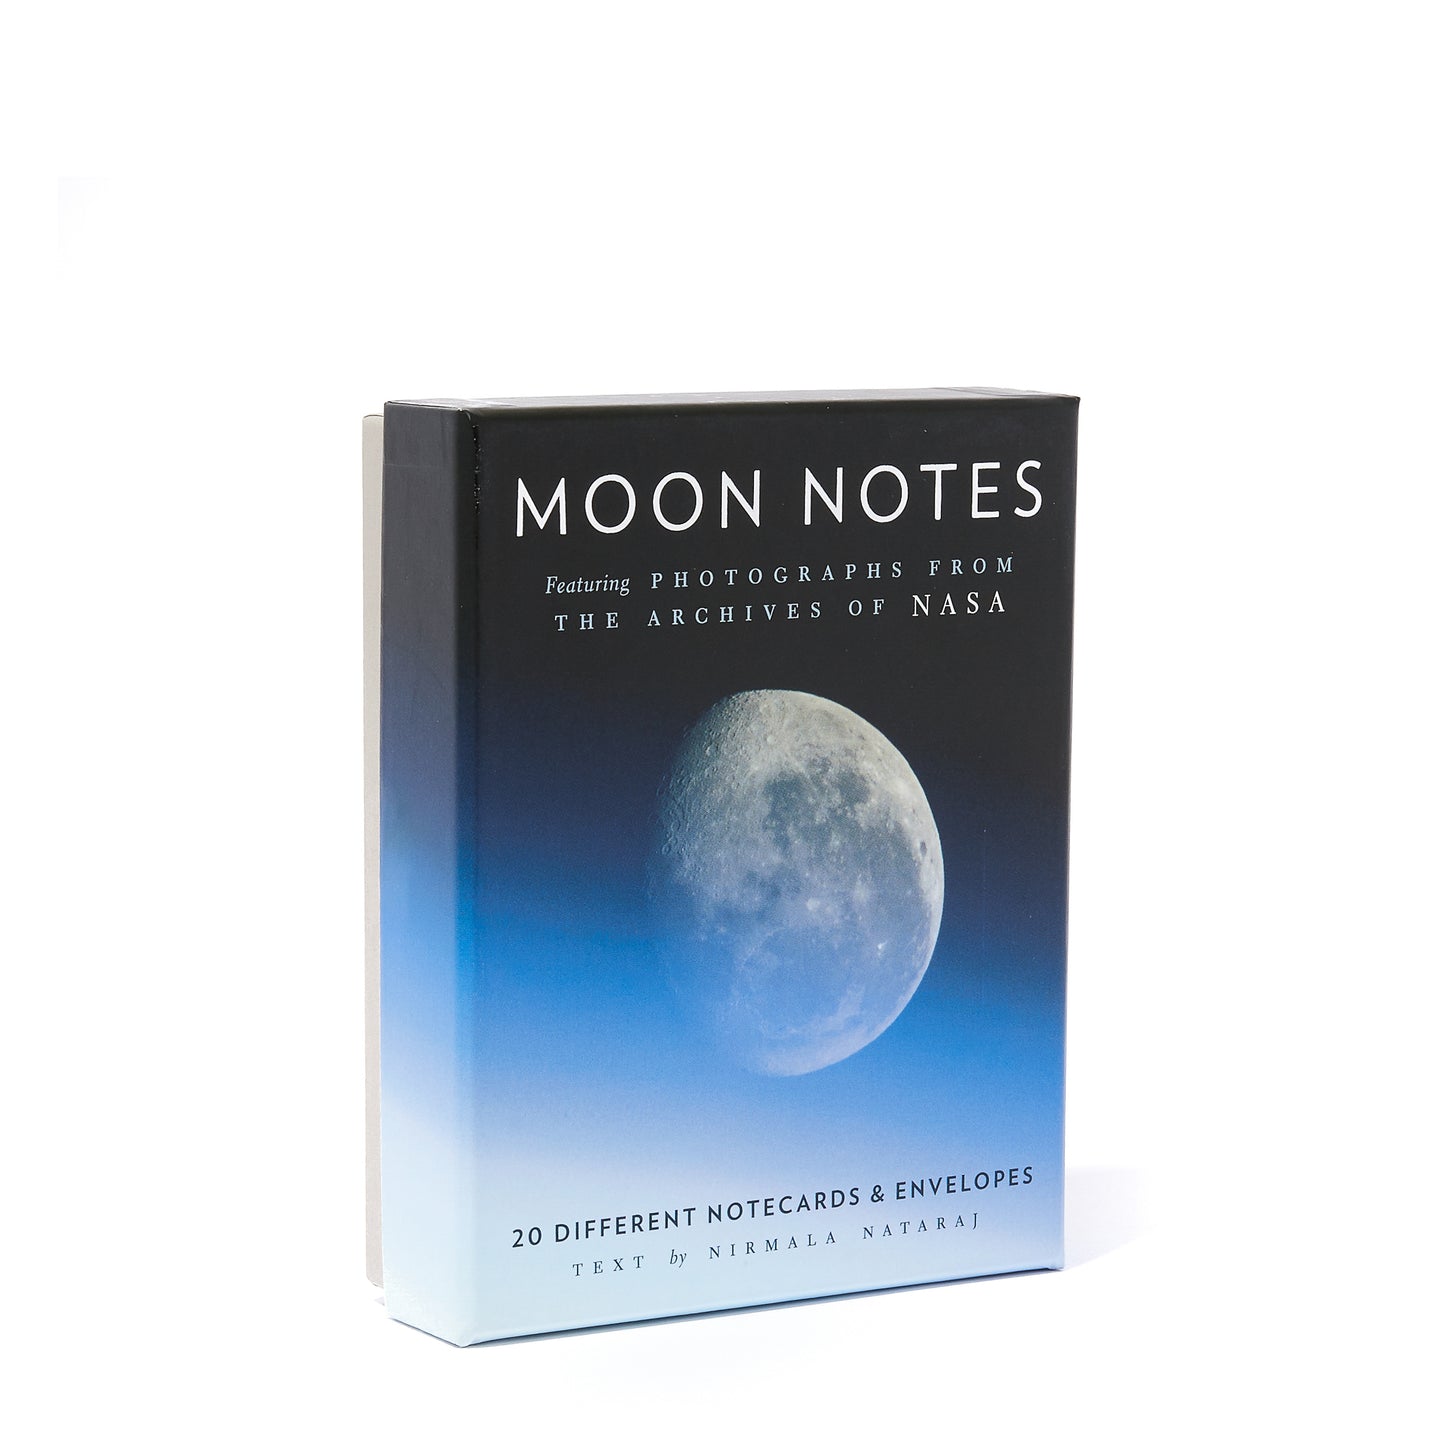 MOON NOTES